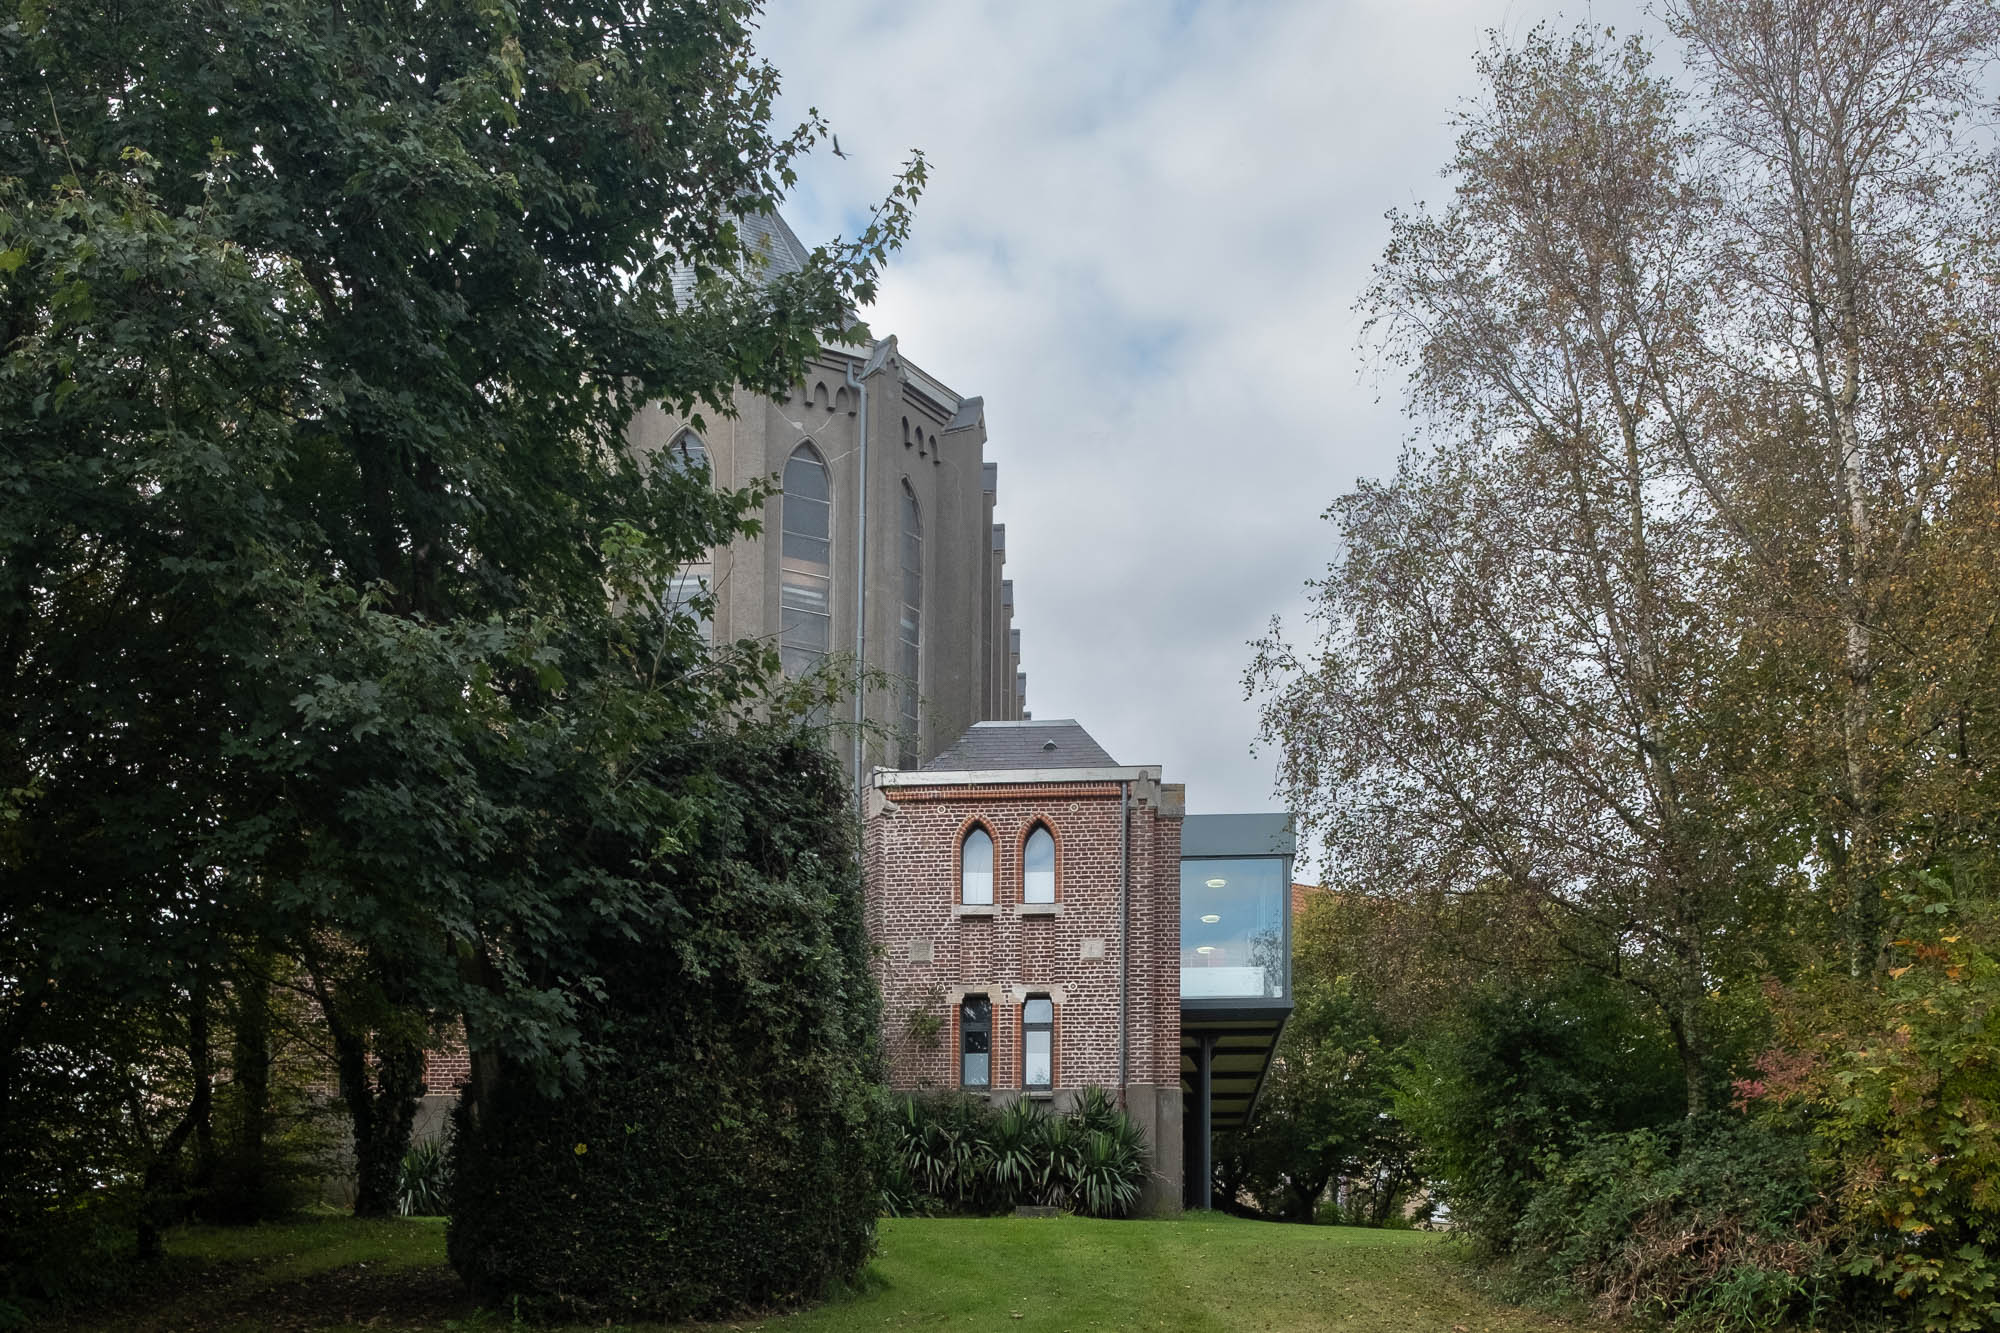 Exterior view of a brick chapel converted to a library peeking through tall trees.